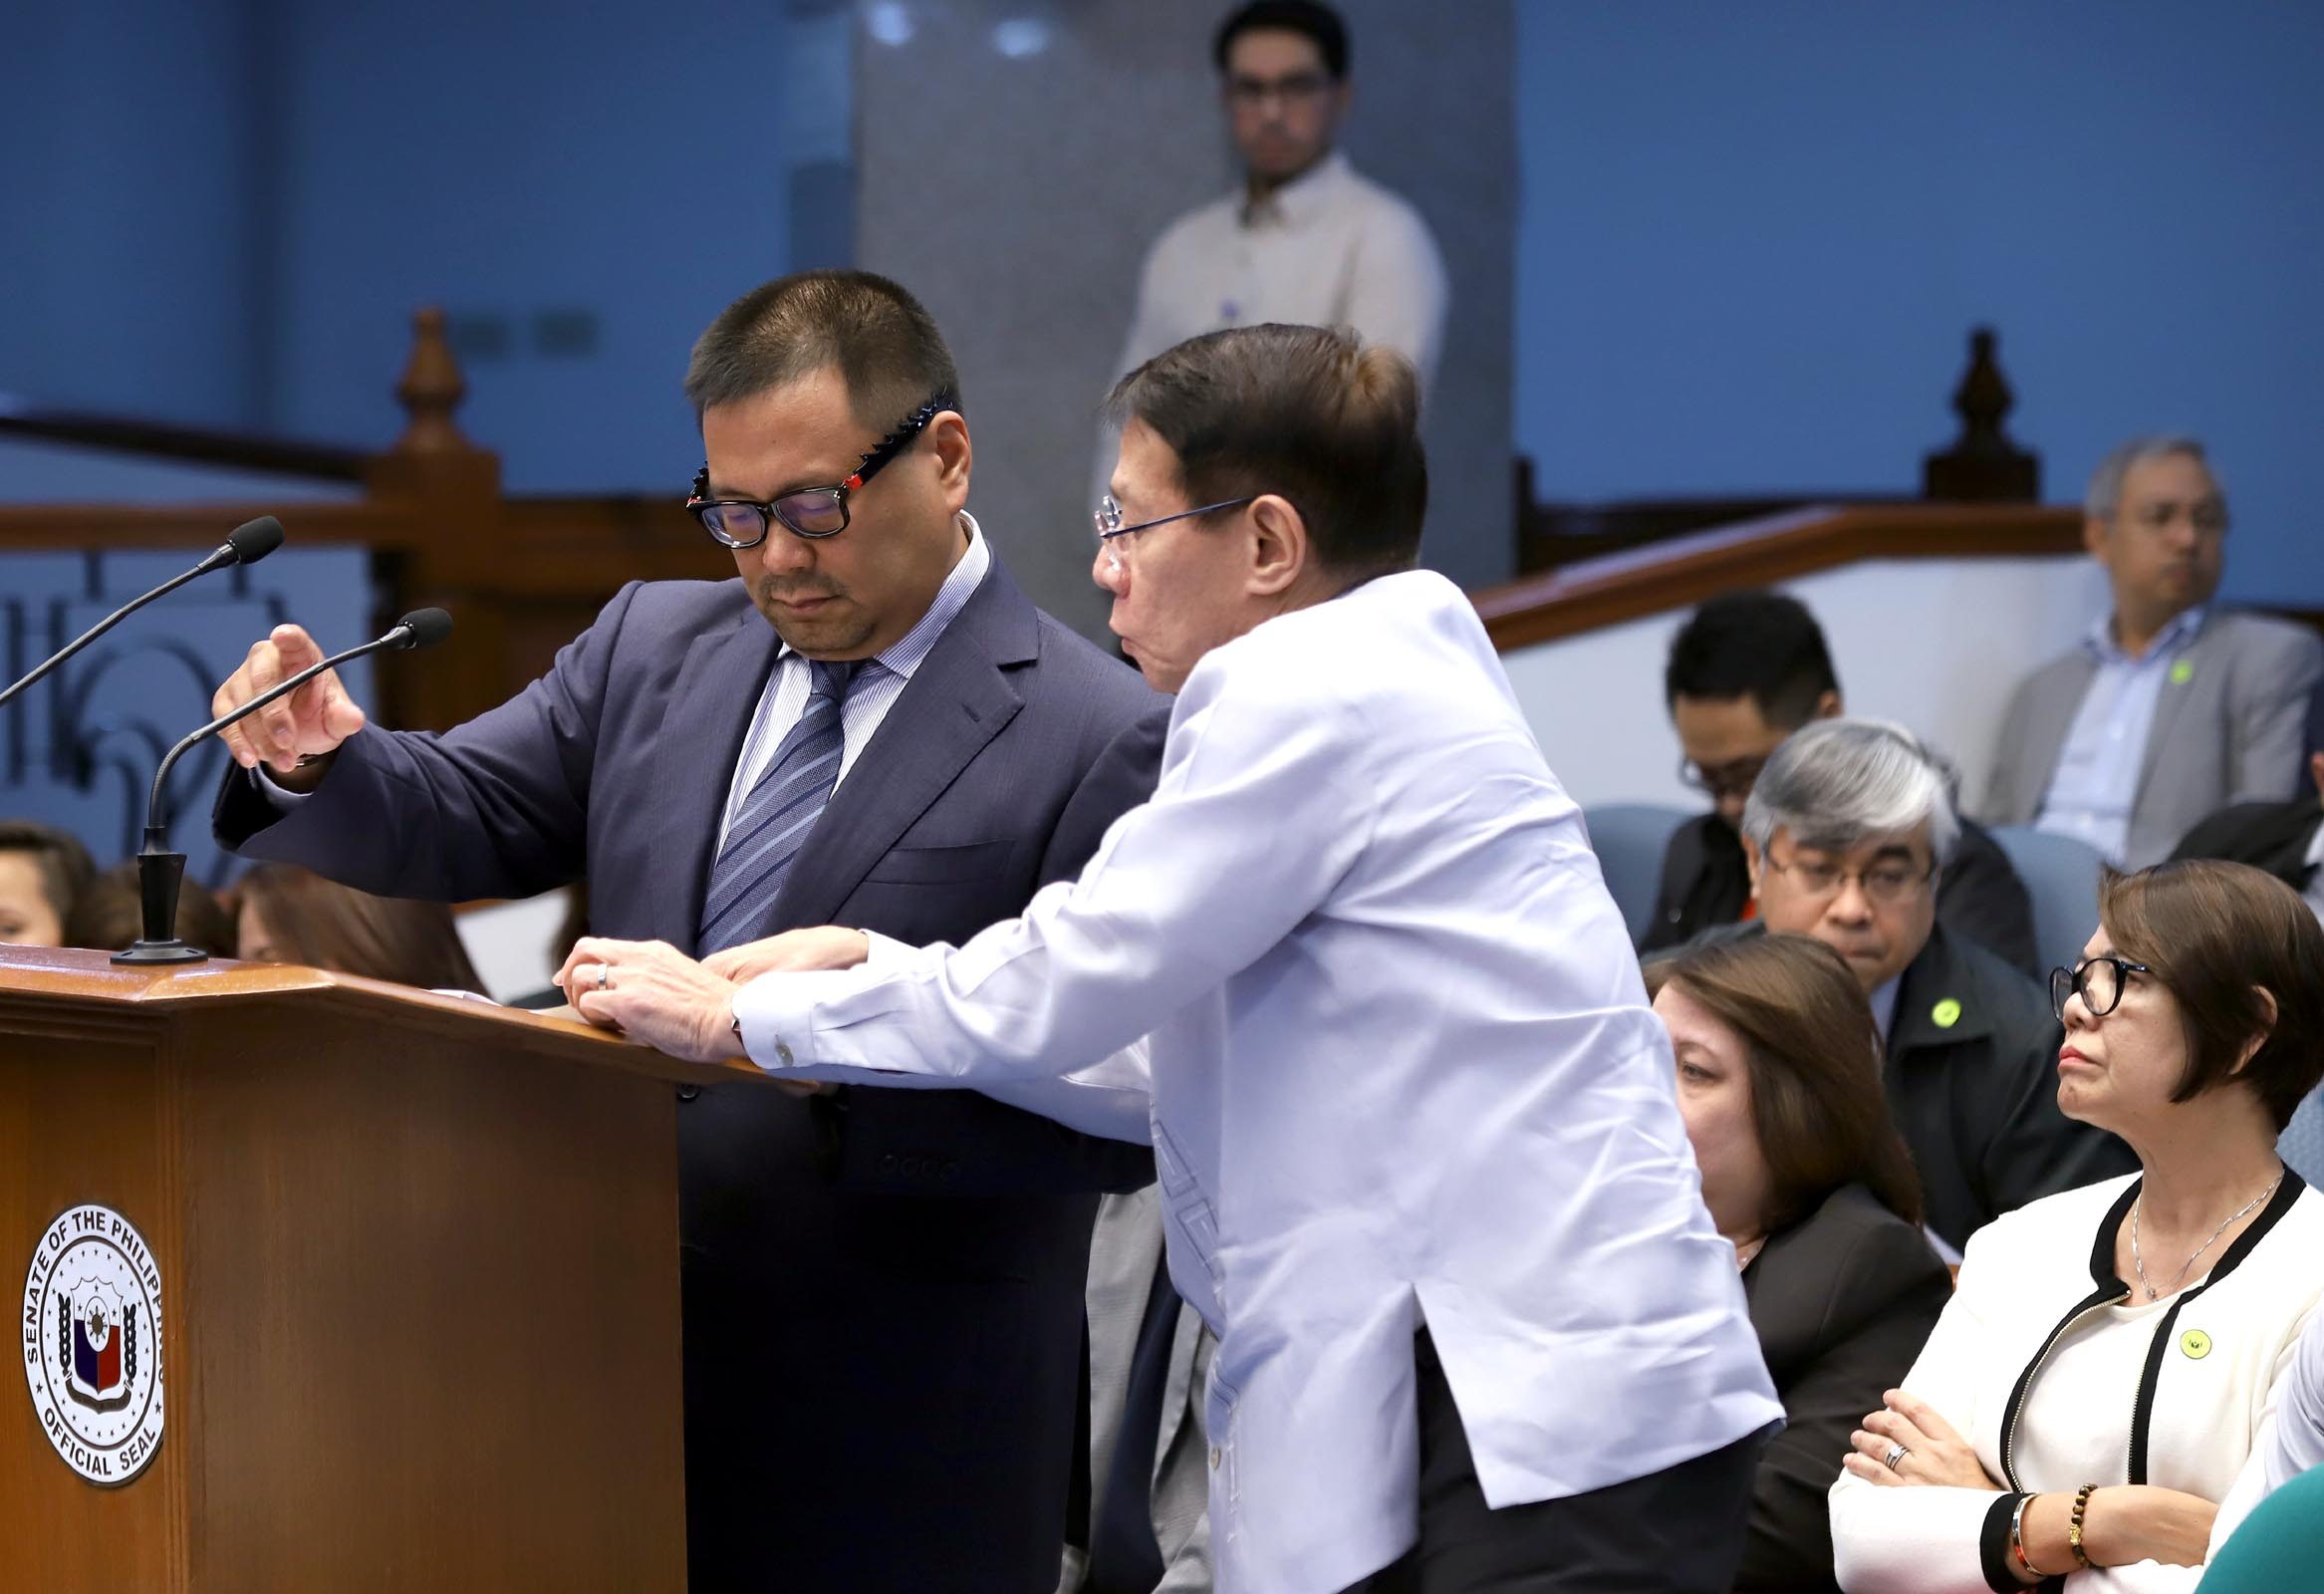 DOH BUDGET. Senator JV Ejercito, chairman of the Senate Committee on Health and Demography, seeks clarification from Health Secretary Francisco Duque during the resumption of the plenary deliberations on the proposed 2019 budget. Photo by Albert Calvelo/Senate PRIB 